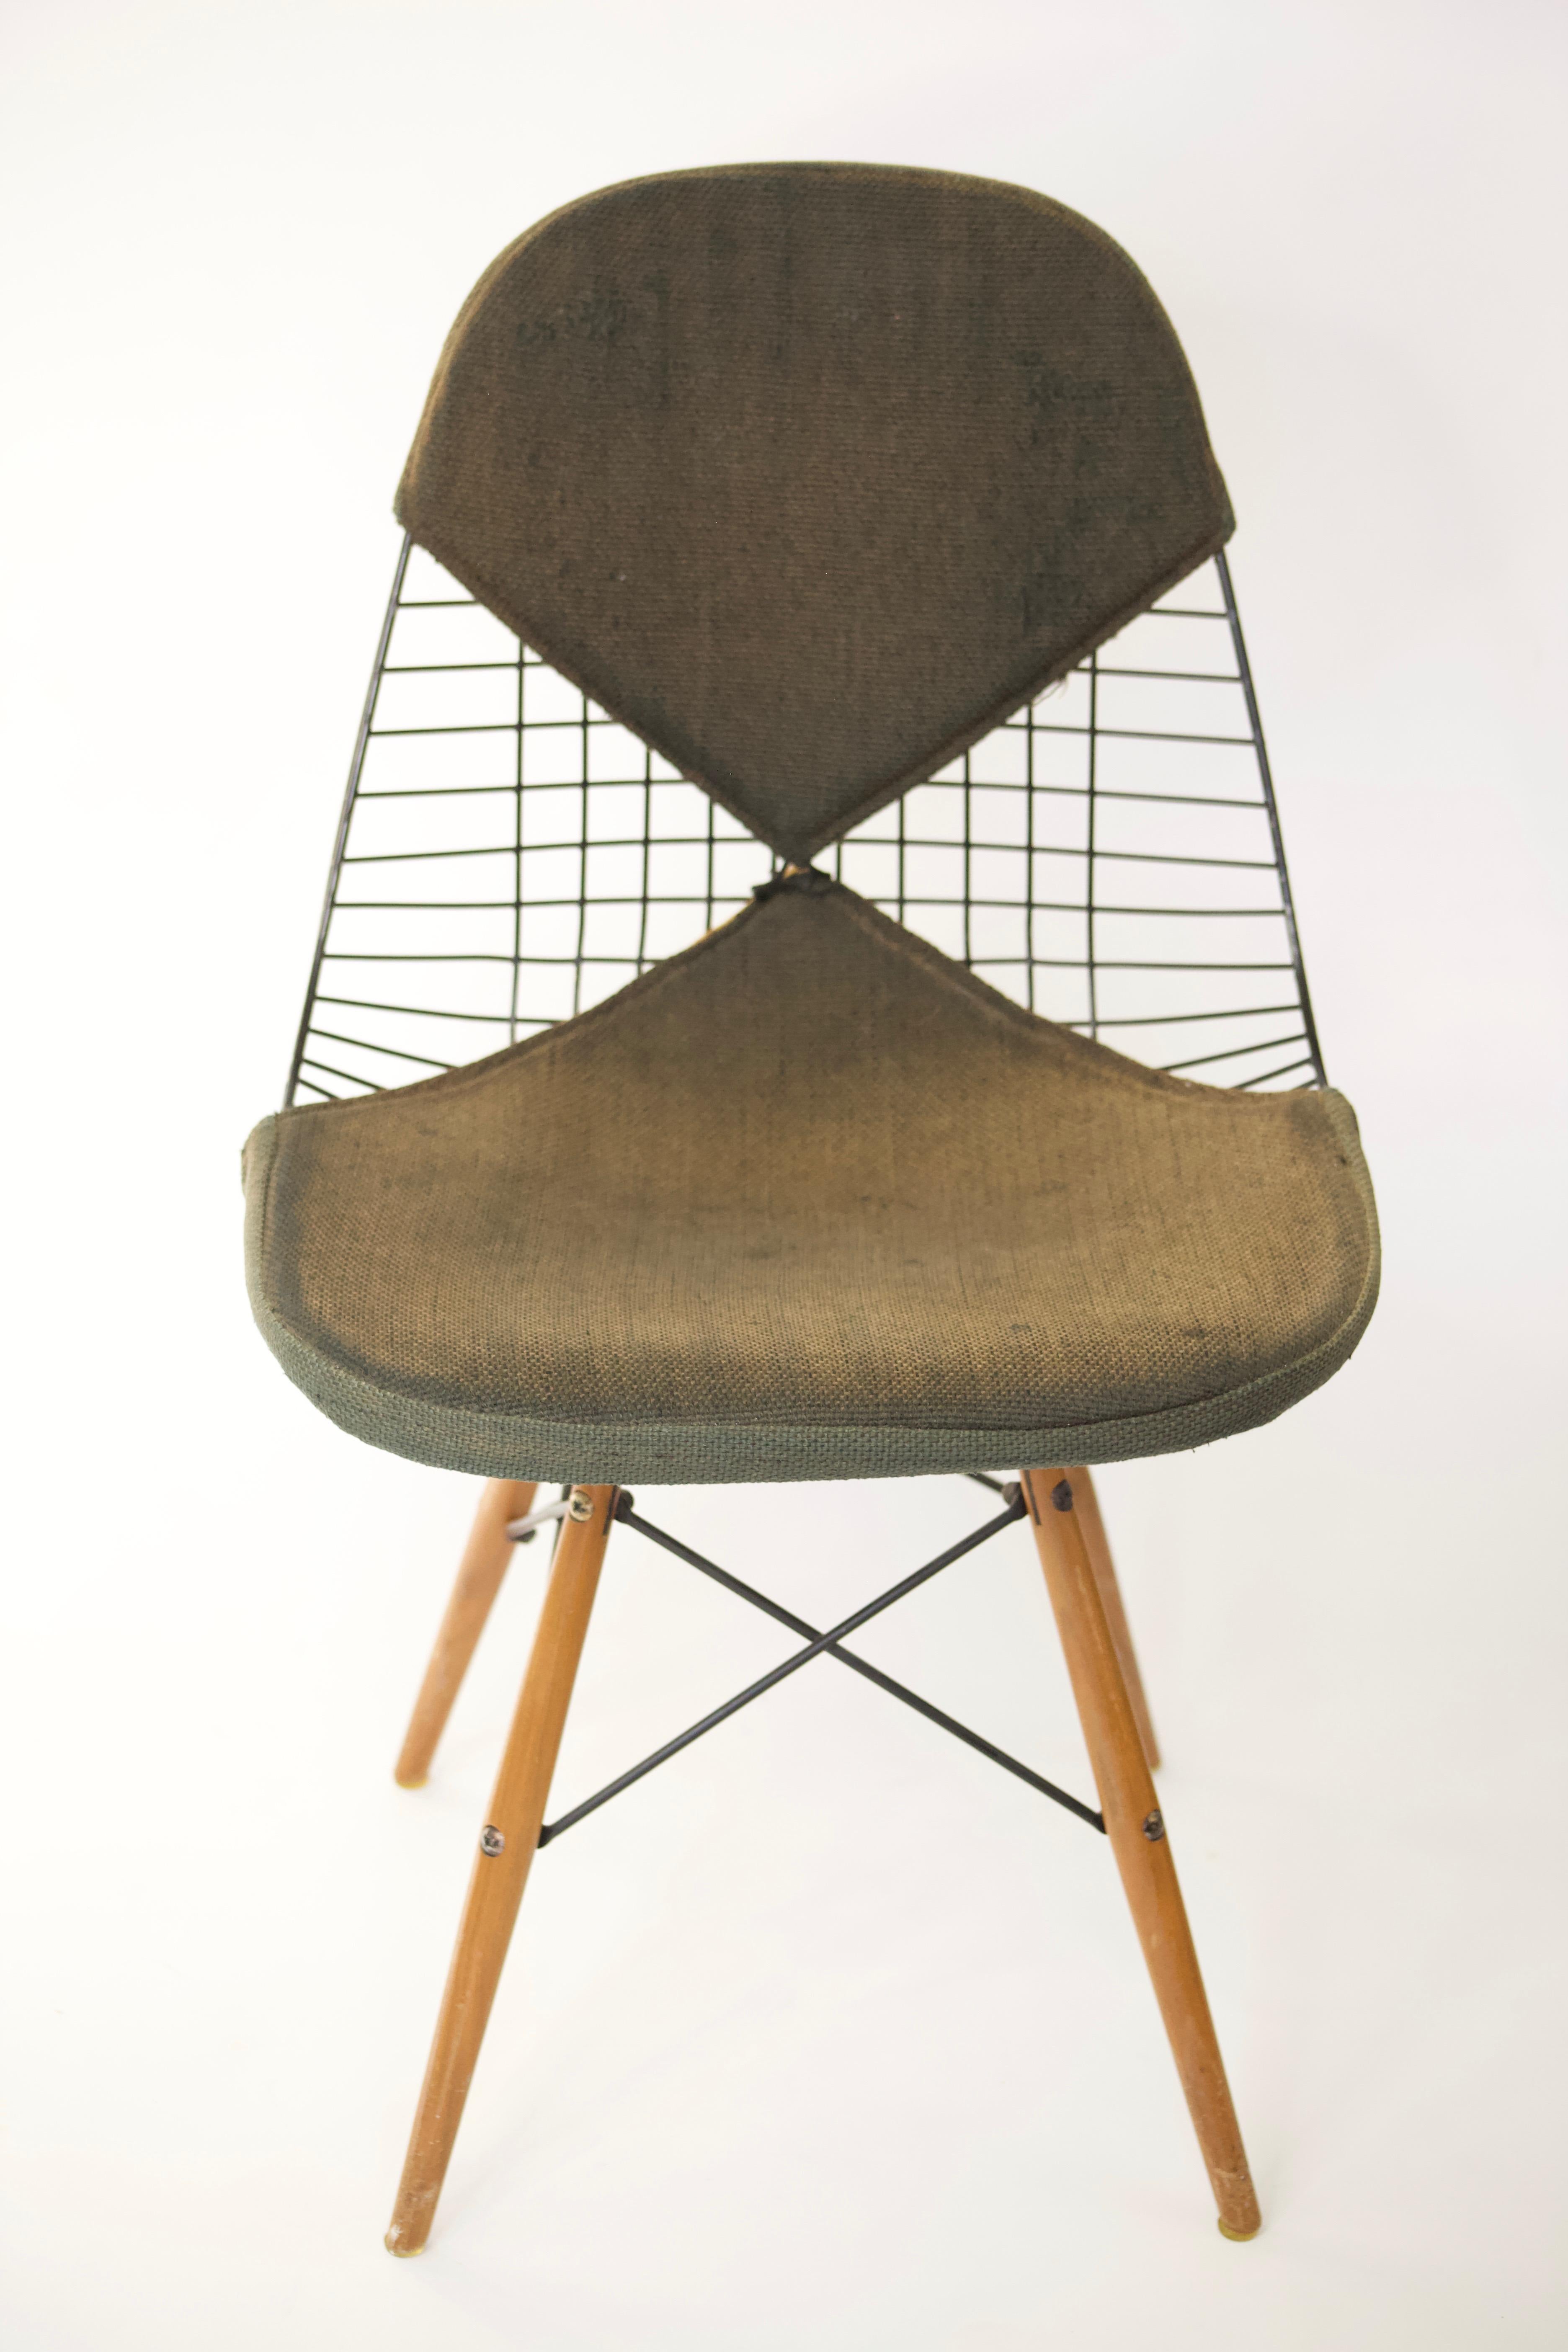 A great vintage example of one of Charles and Ray Eames many groundbreaking, iconic designs. The PKW-2 is a beautiful blend of metal, fabric and wood distilled into a functional piece of art.